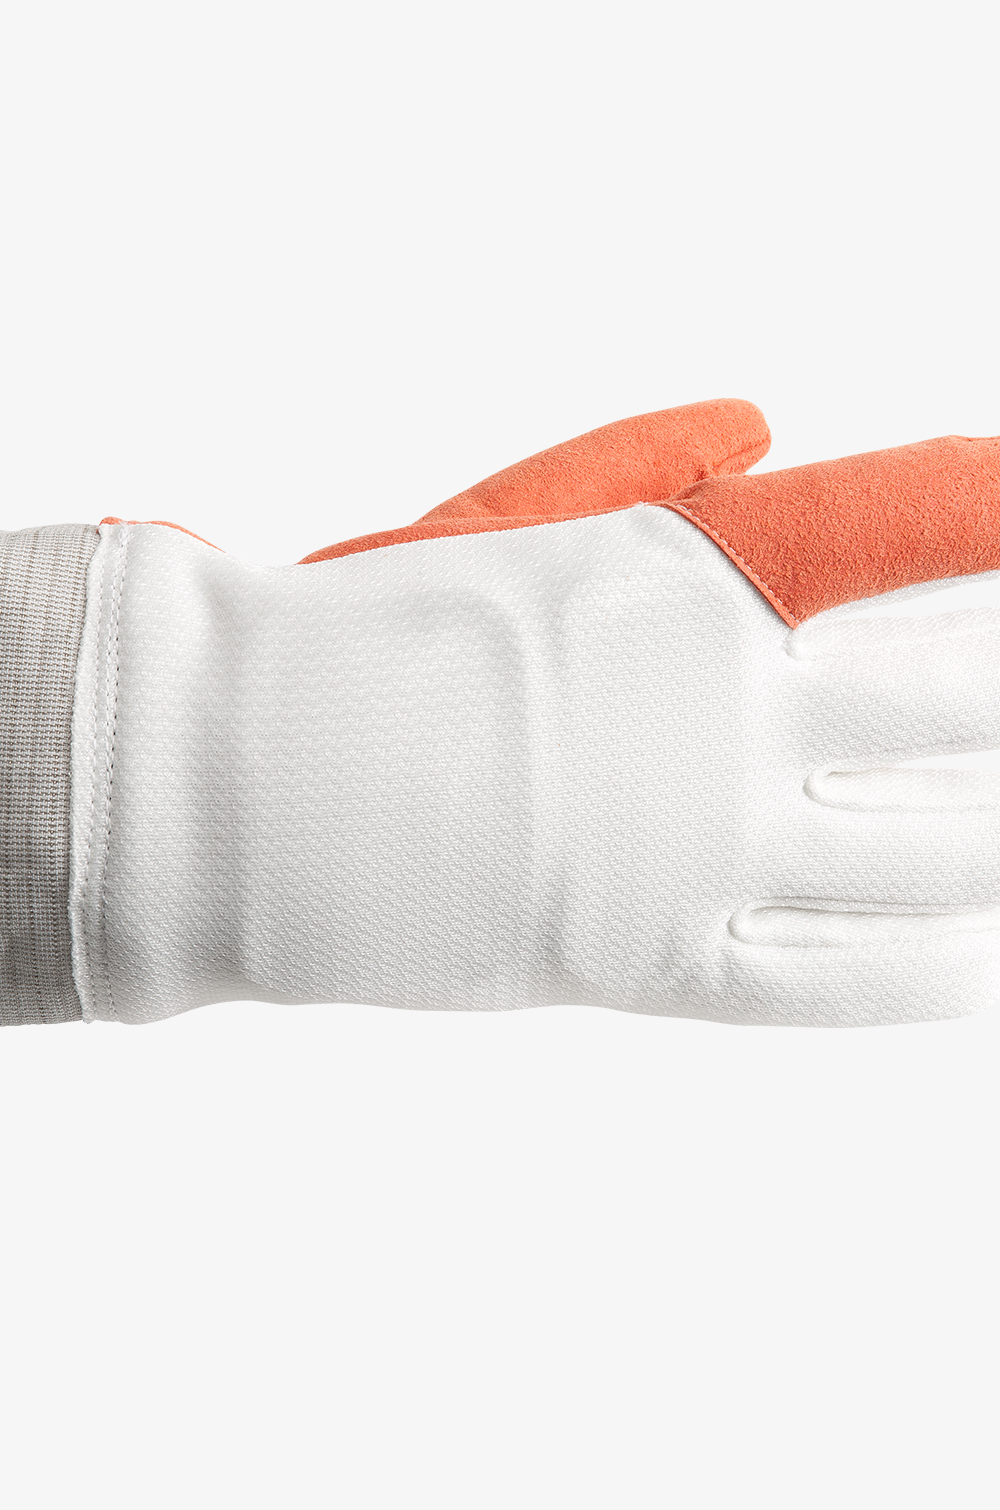 Electric Sabre Glove (800N) (phase-out model)